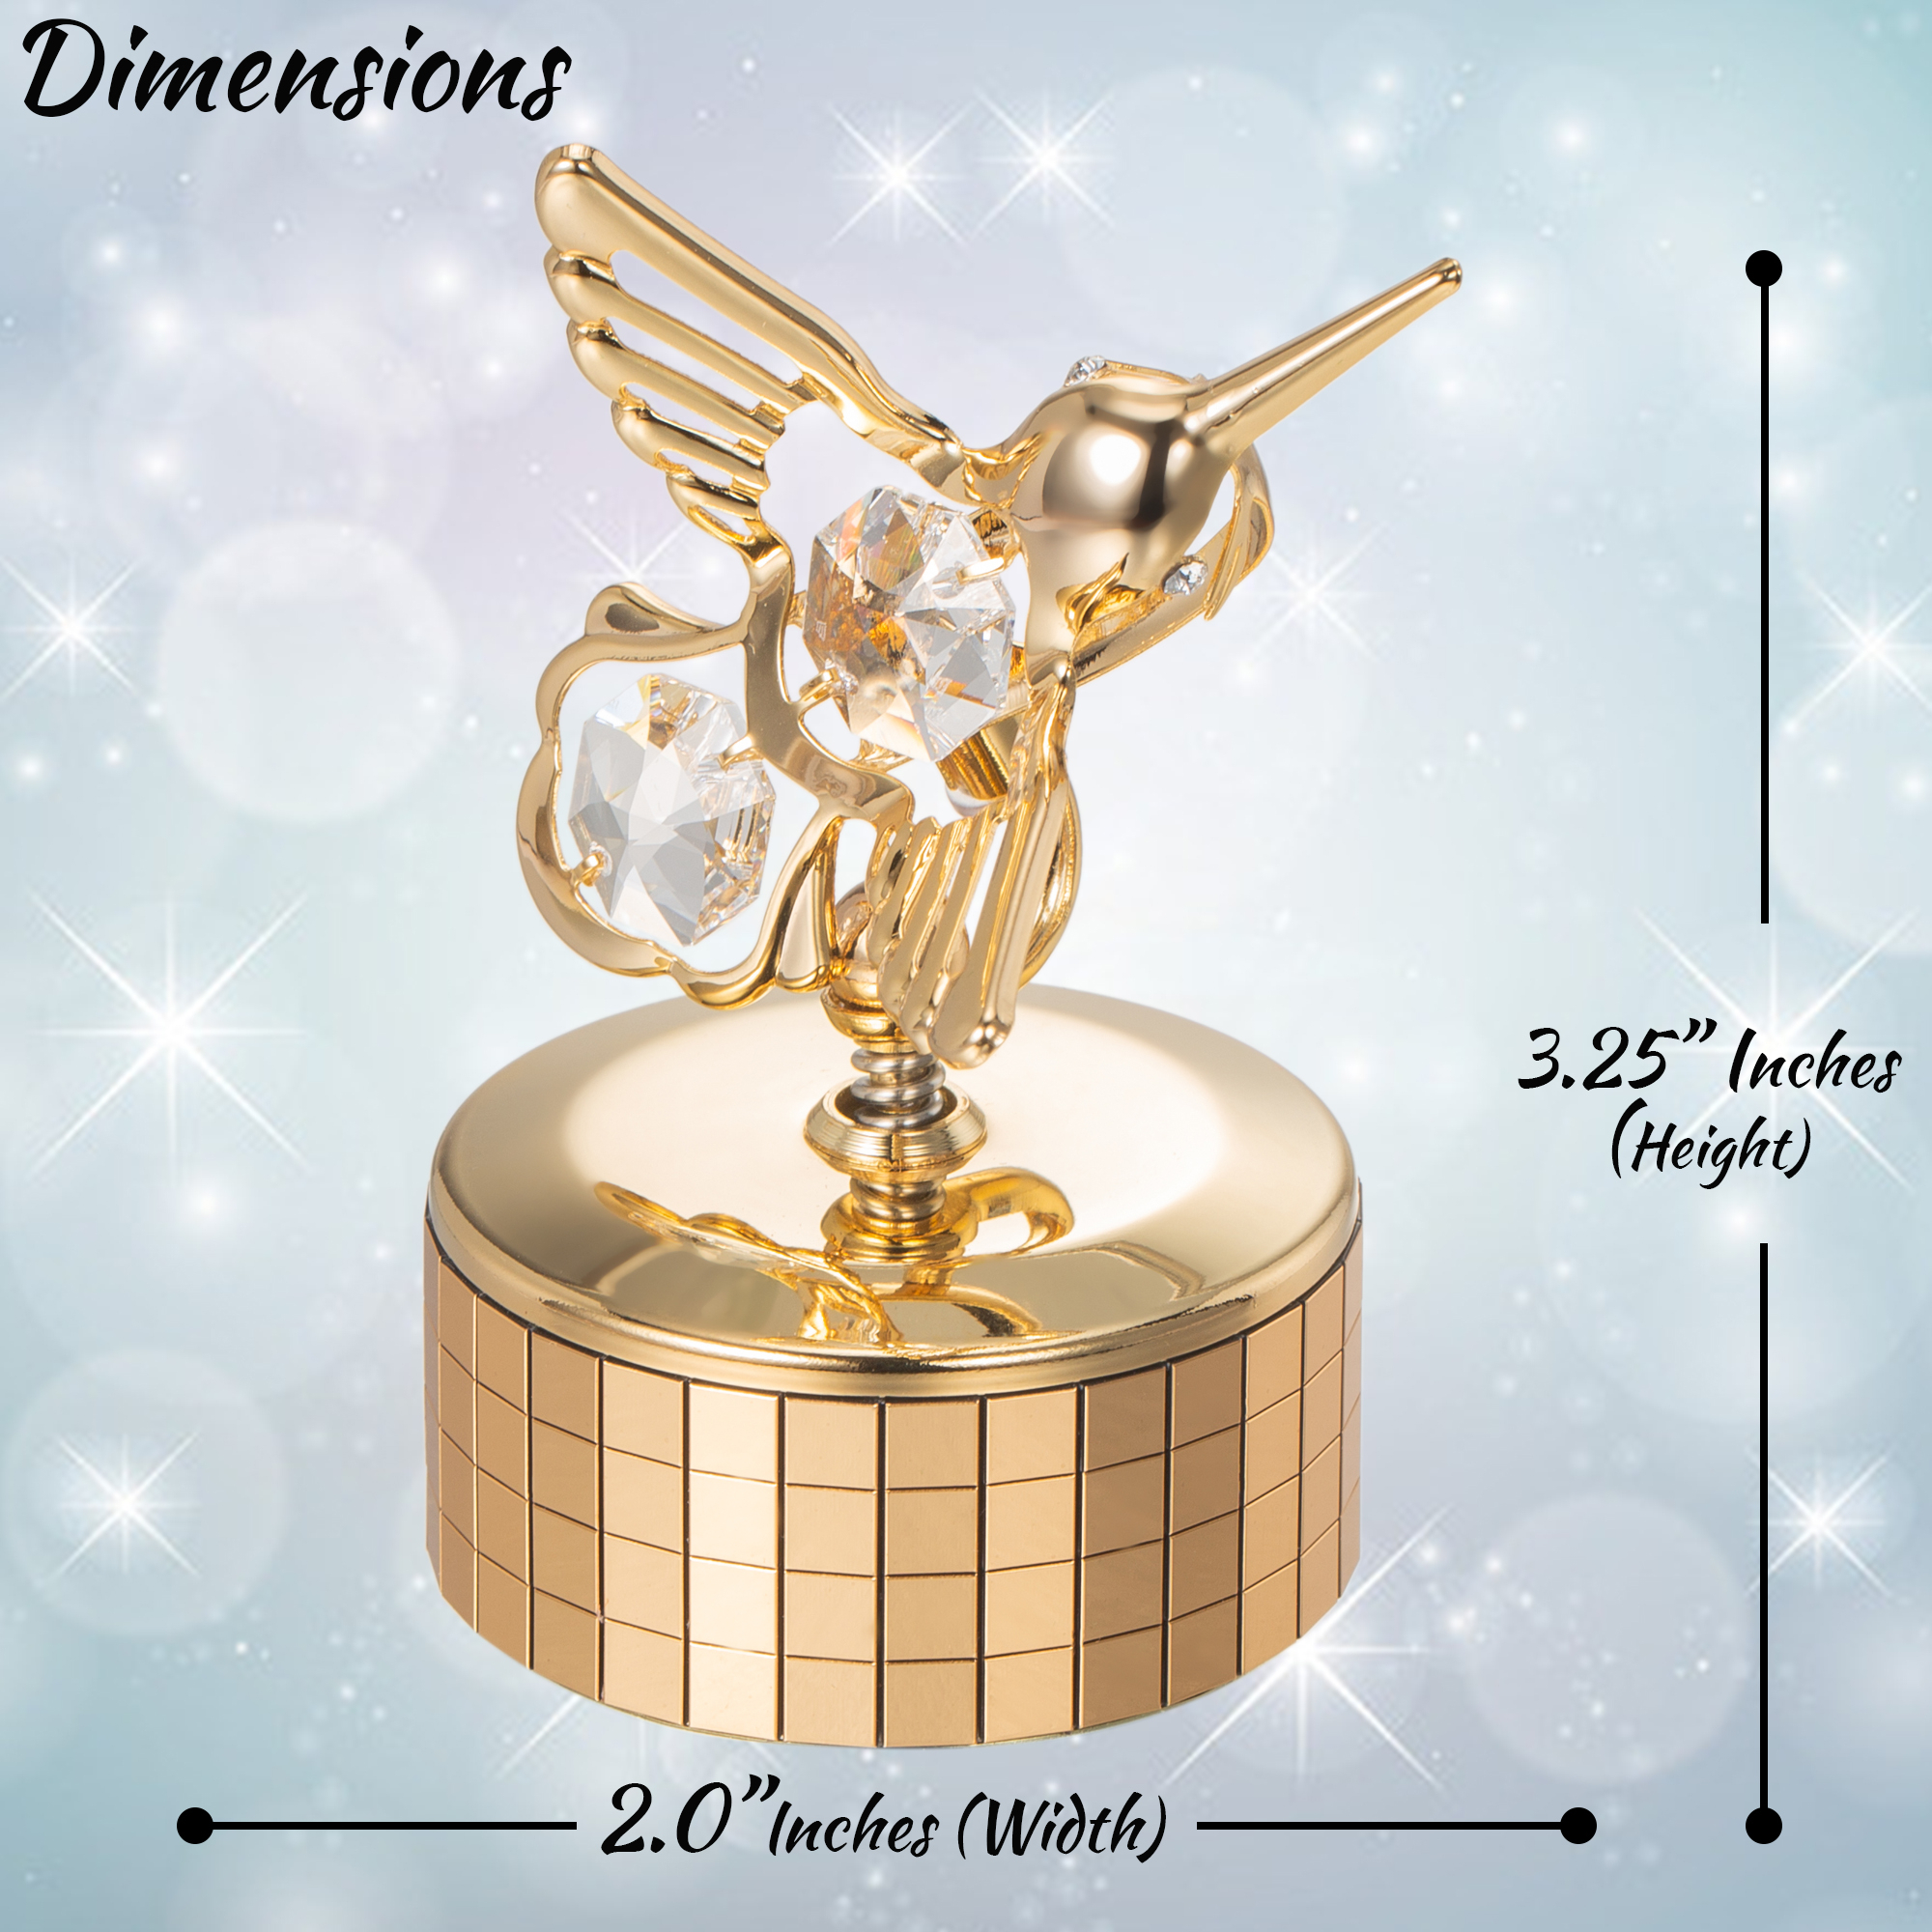 Best Mother's Day Gift Matashi 24K Gold Plated Music Box Plays Swan Lake With Hummingbird Figurine #1 Gift For Mom From Daughter, Son